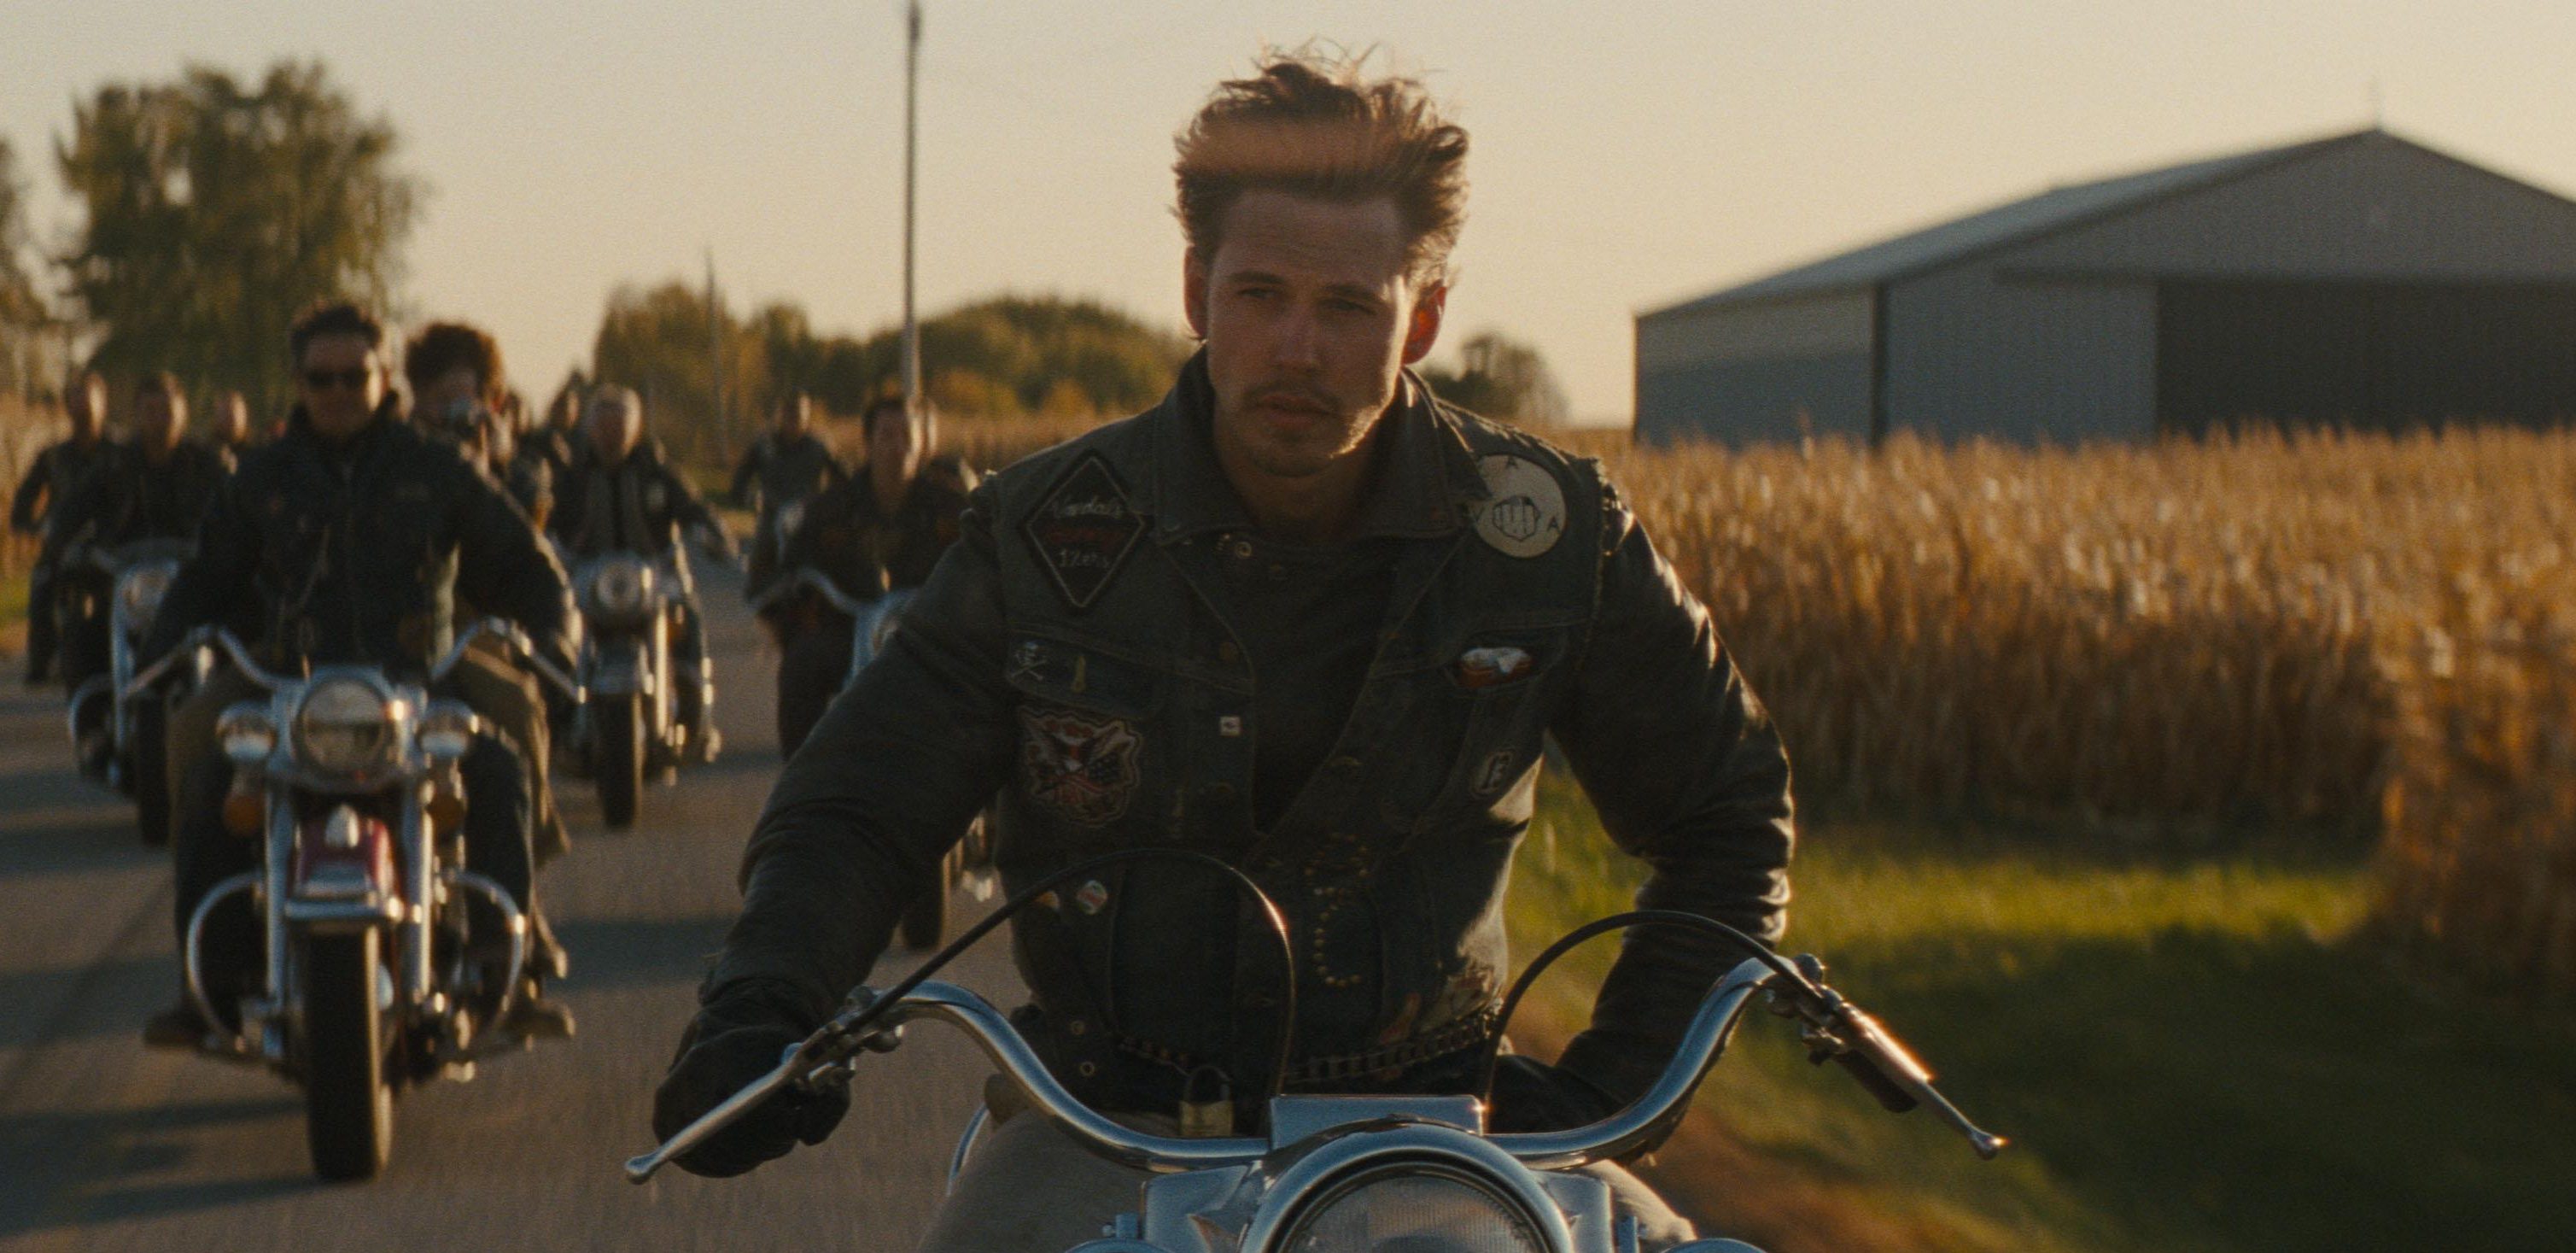 The Bikeriders: Is the Movie Inspired by Real Events?